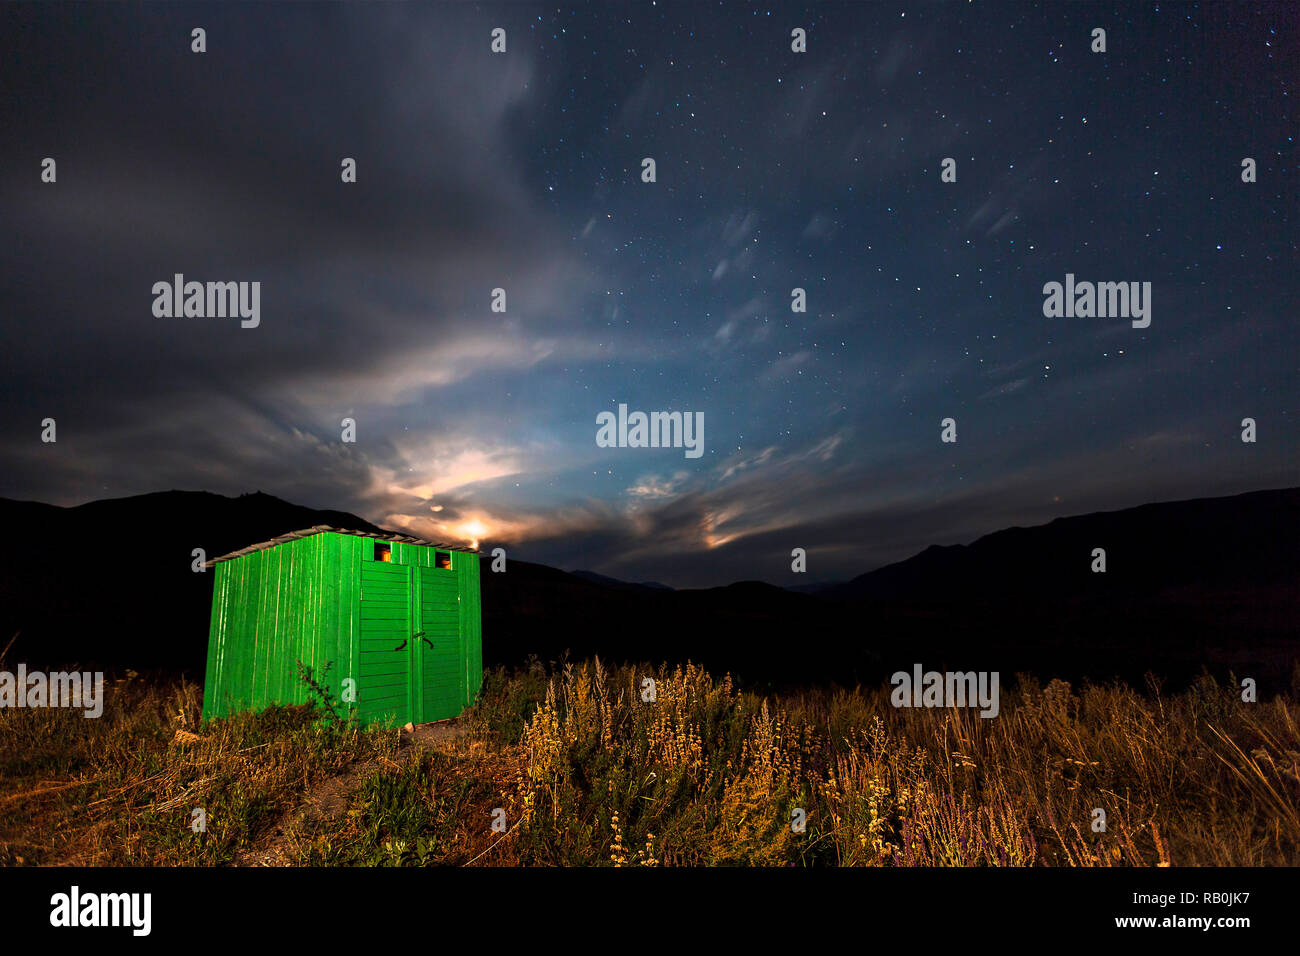 Green wooden hut with moon setting and stars in the sky, in Kolsai Lakes area, Kazakhstan. Stock Photo